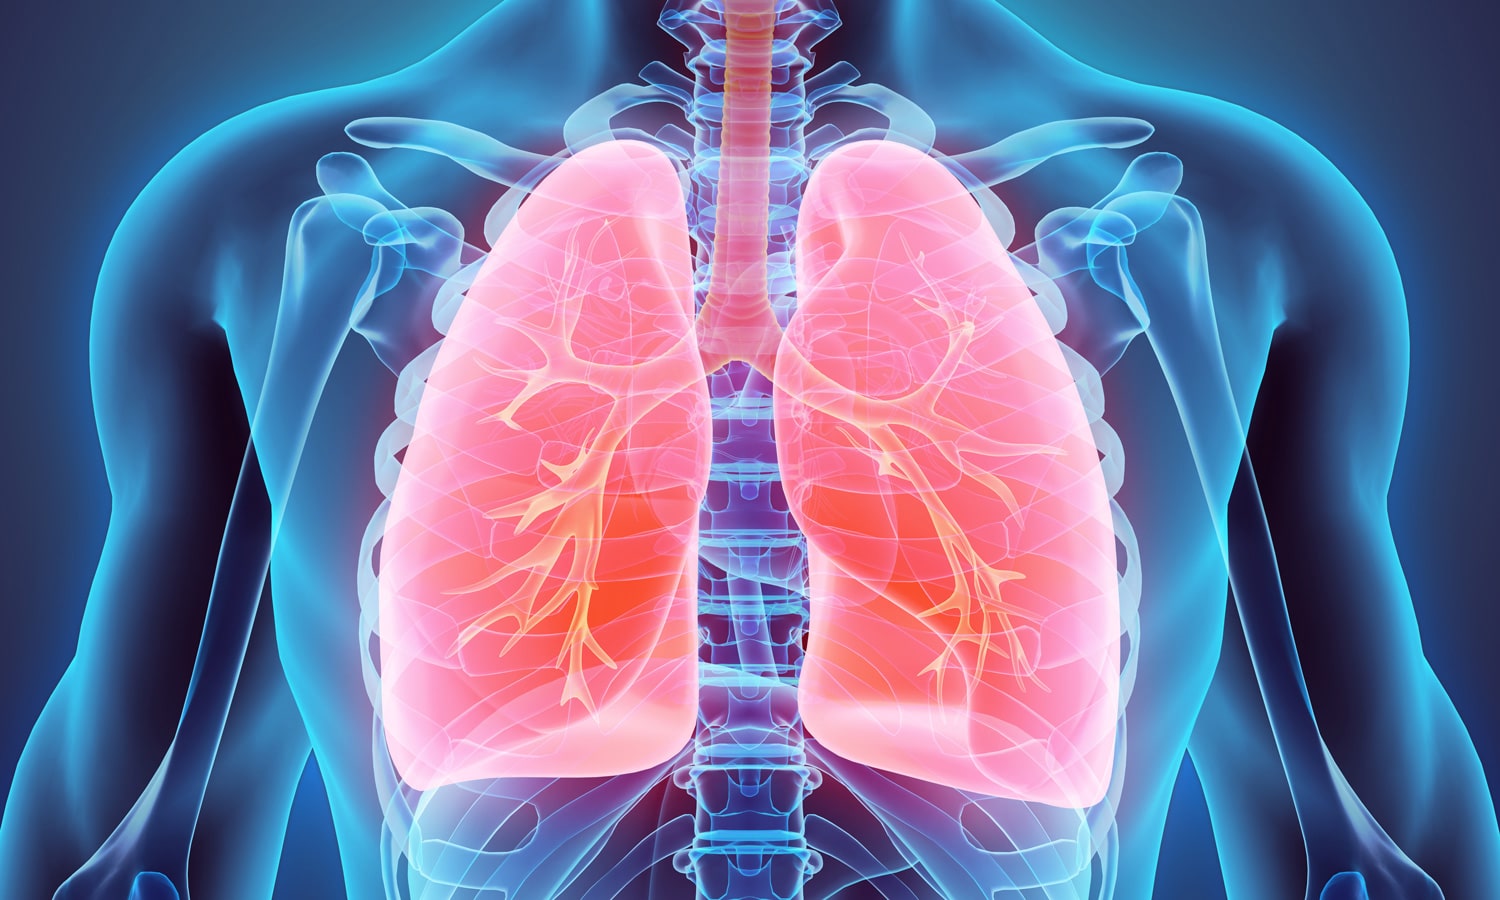 How Does Smoking Marijuana Affect Your Lungs Exactly?